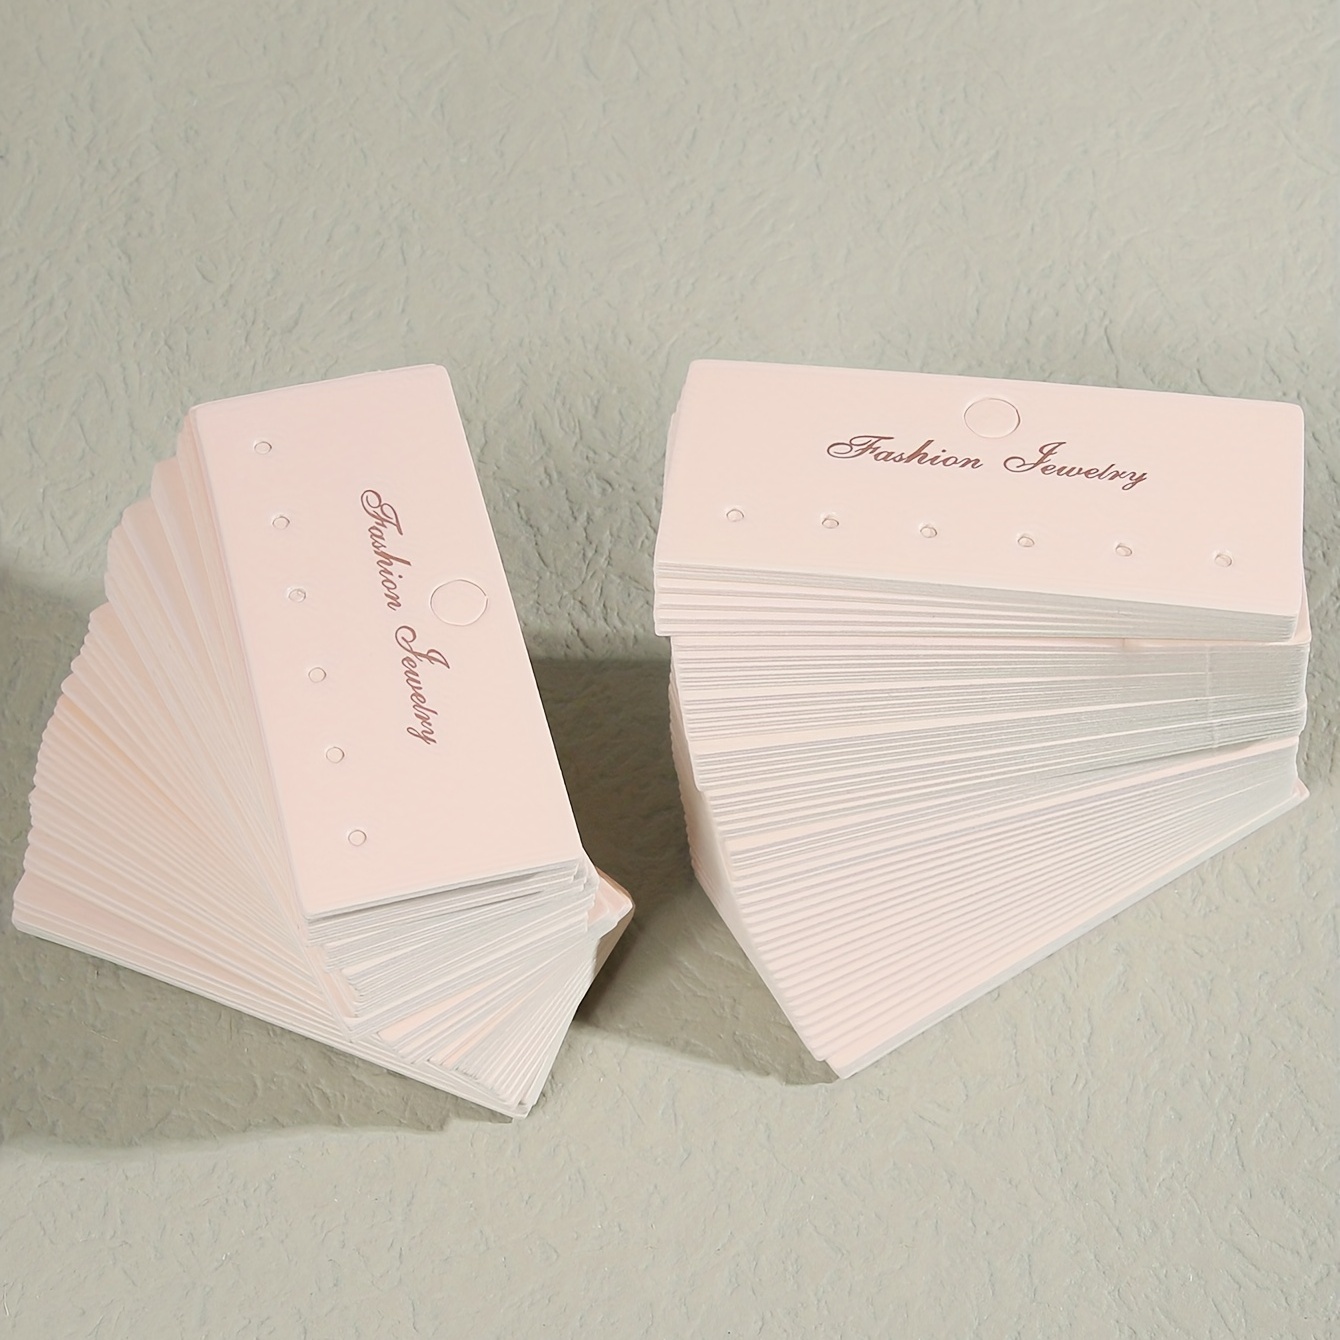 200pcs Earring Display Cards Set, Including 50pcs Earring Display Cards,  50pcs Self-Sealing Bags And 100pcs Earring Backs And Pendant Display Cards  For Diy Jewelry Presentation